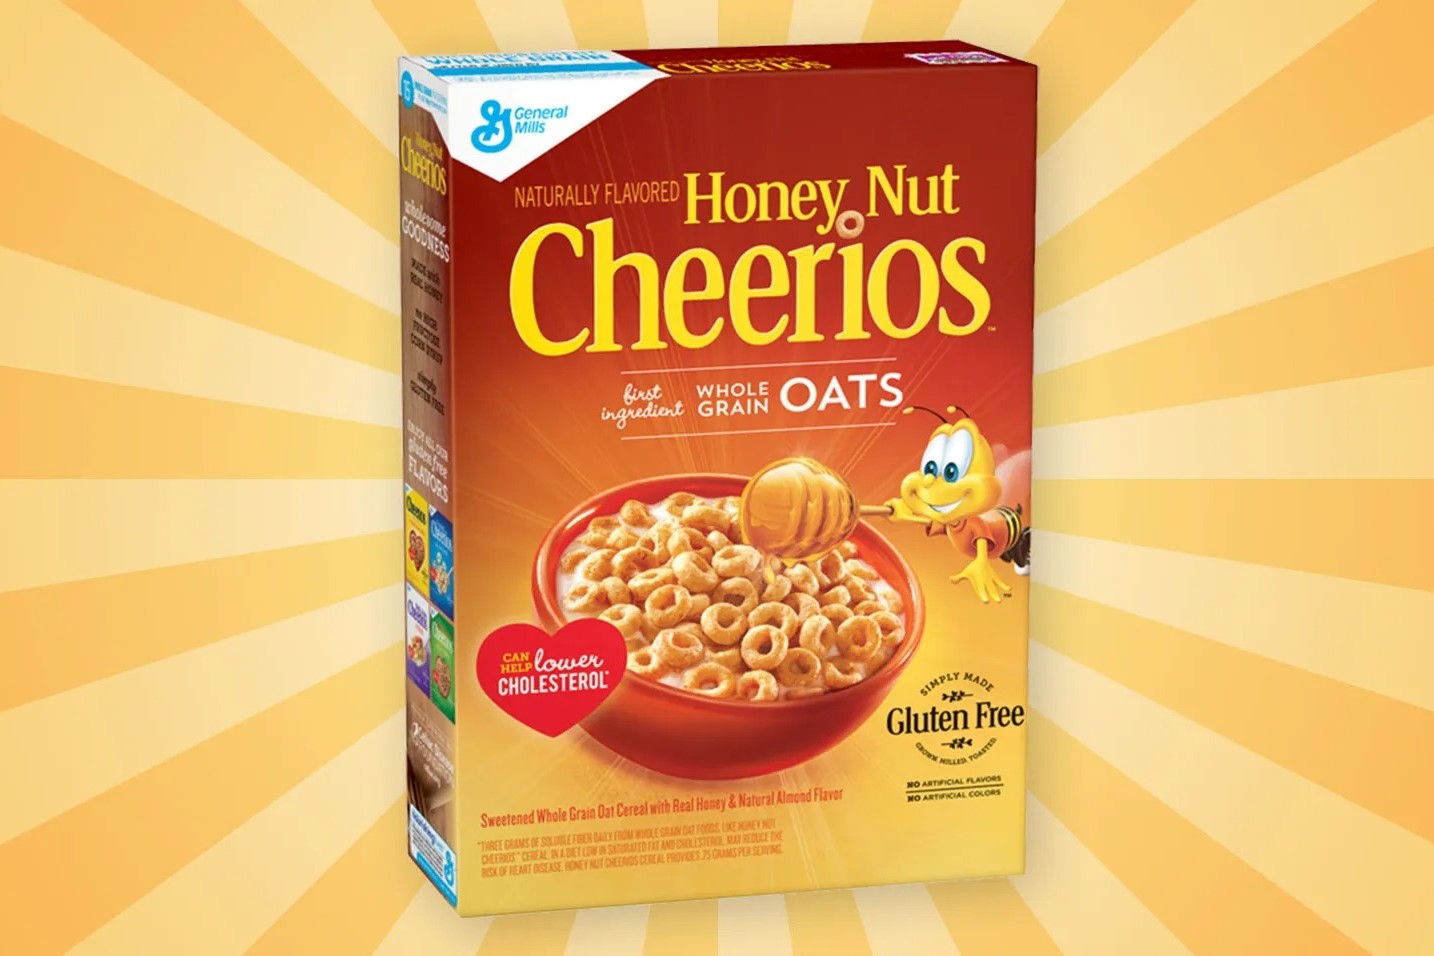 10 Nutrition Facts Of Honey Nut Cheerios 